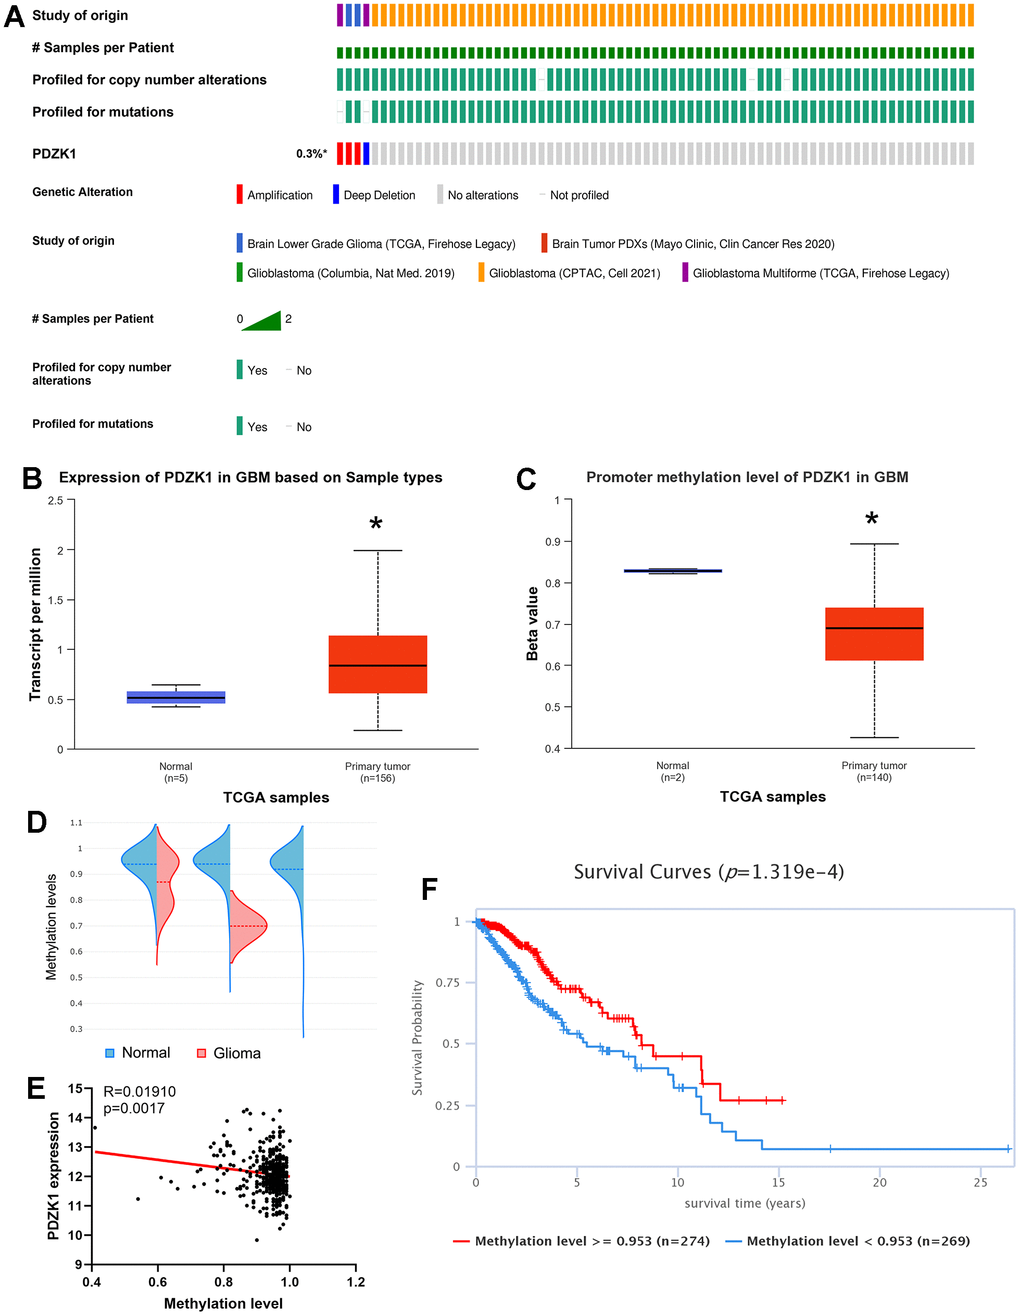 Genetic alterations and DNA methylation levels of PDZK1 in glioma. (A) Summary of the alteration rates of PDZK1 in glioma (cBioPortal). (B, C) DNA methylation changes in PDZK1 in glioma assessed using the UALCAN database. * p D) The methylation levels of the PDZK1 CpG island were analyzed by utilizing the EWAS Data Hub. (E) The relationship between the methylation levels of PDZK1 CpG islands and the expression of PDZK1 mRNA was analyzed by utilizing the EWAS Data Hub. (F) The OS of patients with gliomas stratified by the methylation level of the PDZK1 CpG island was analyzed via the EWAS Data Hub.